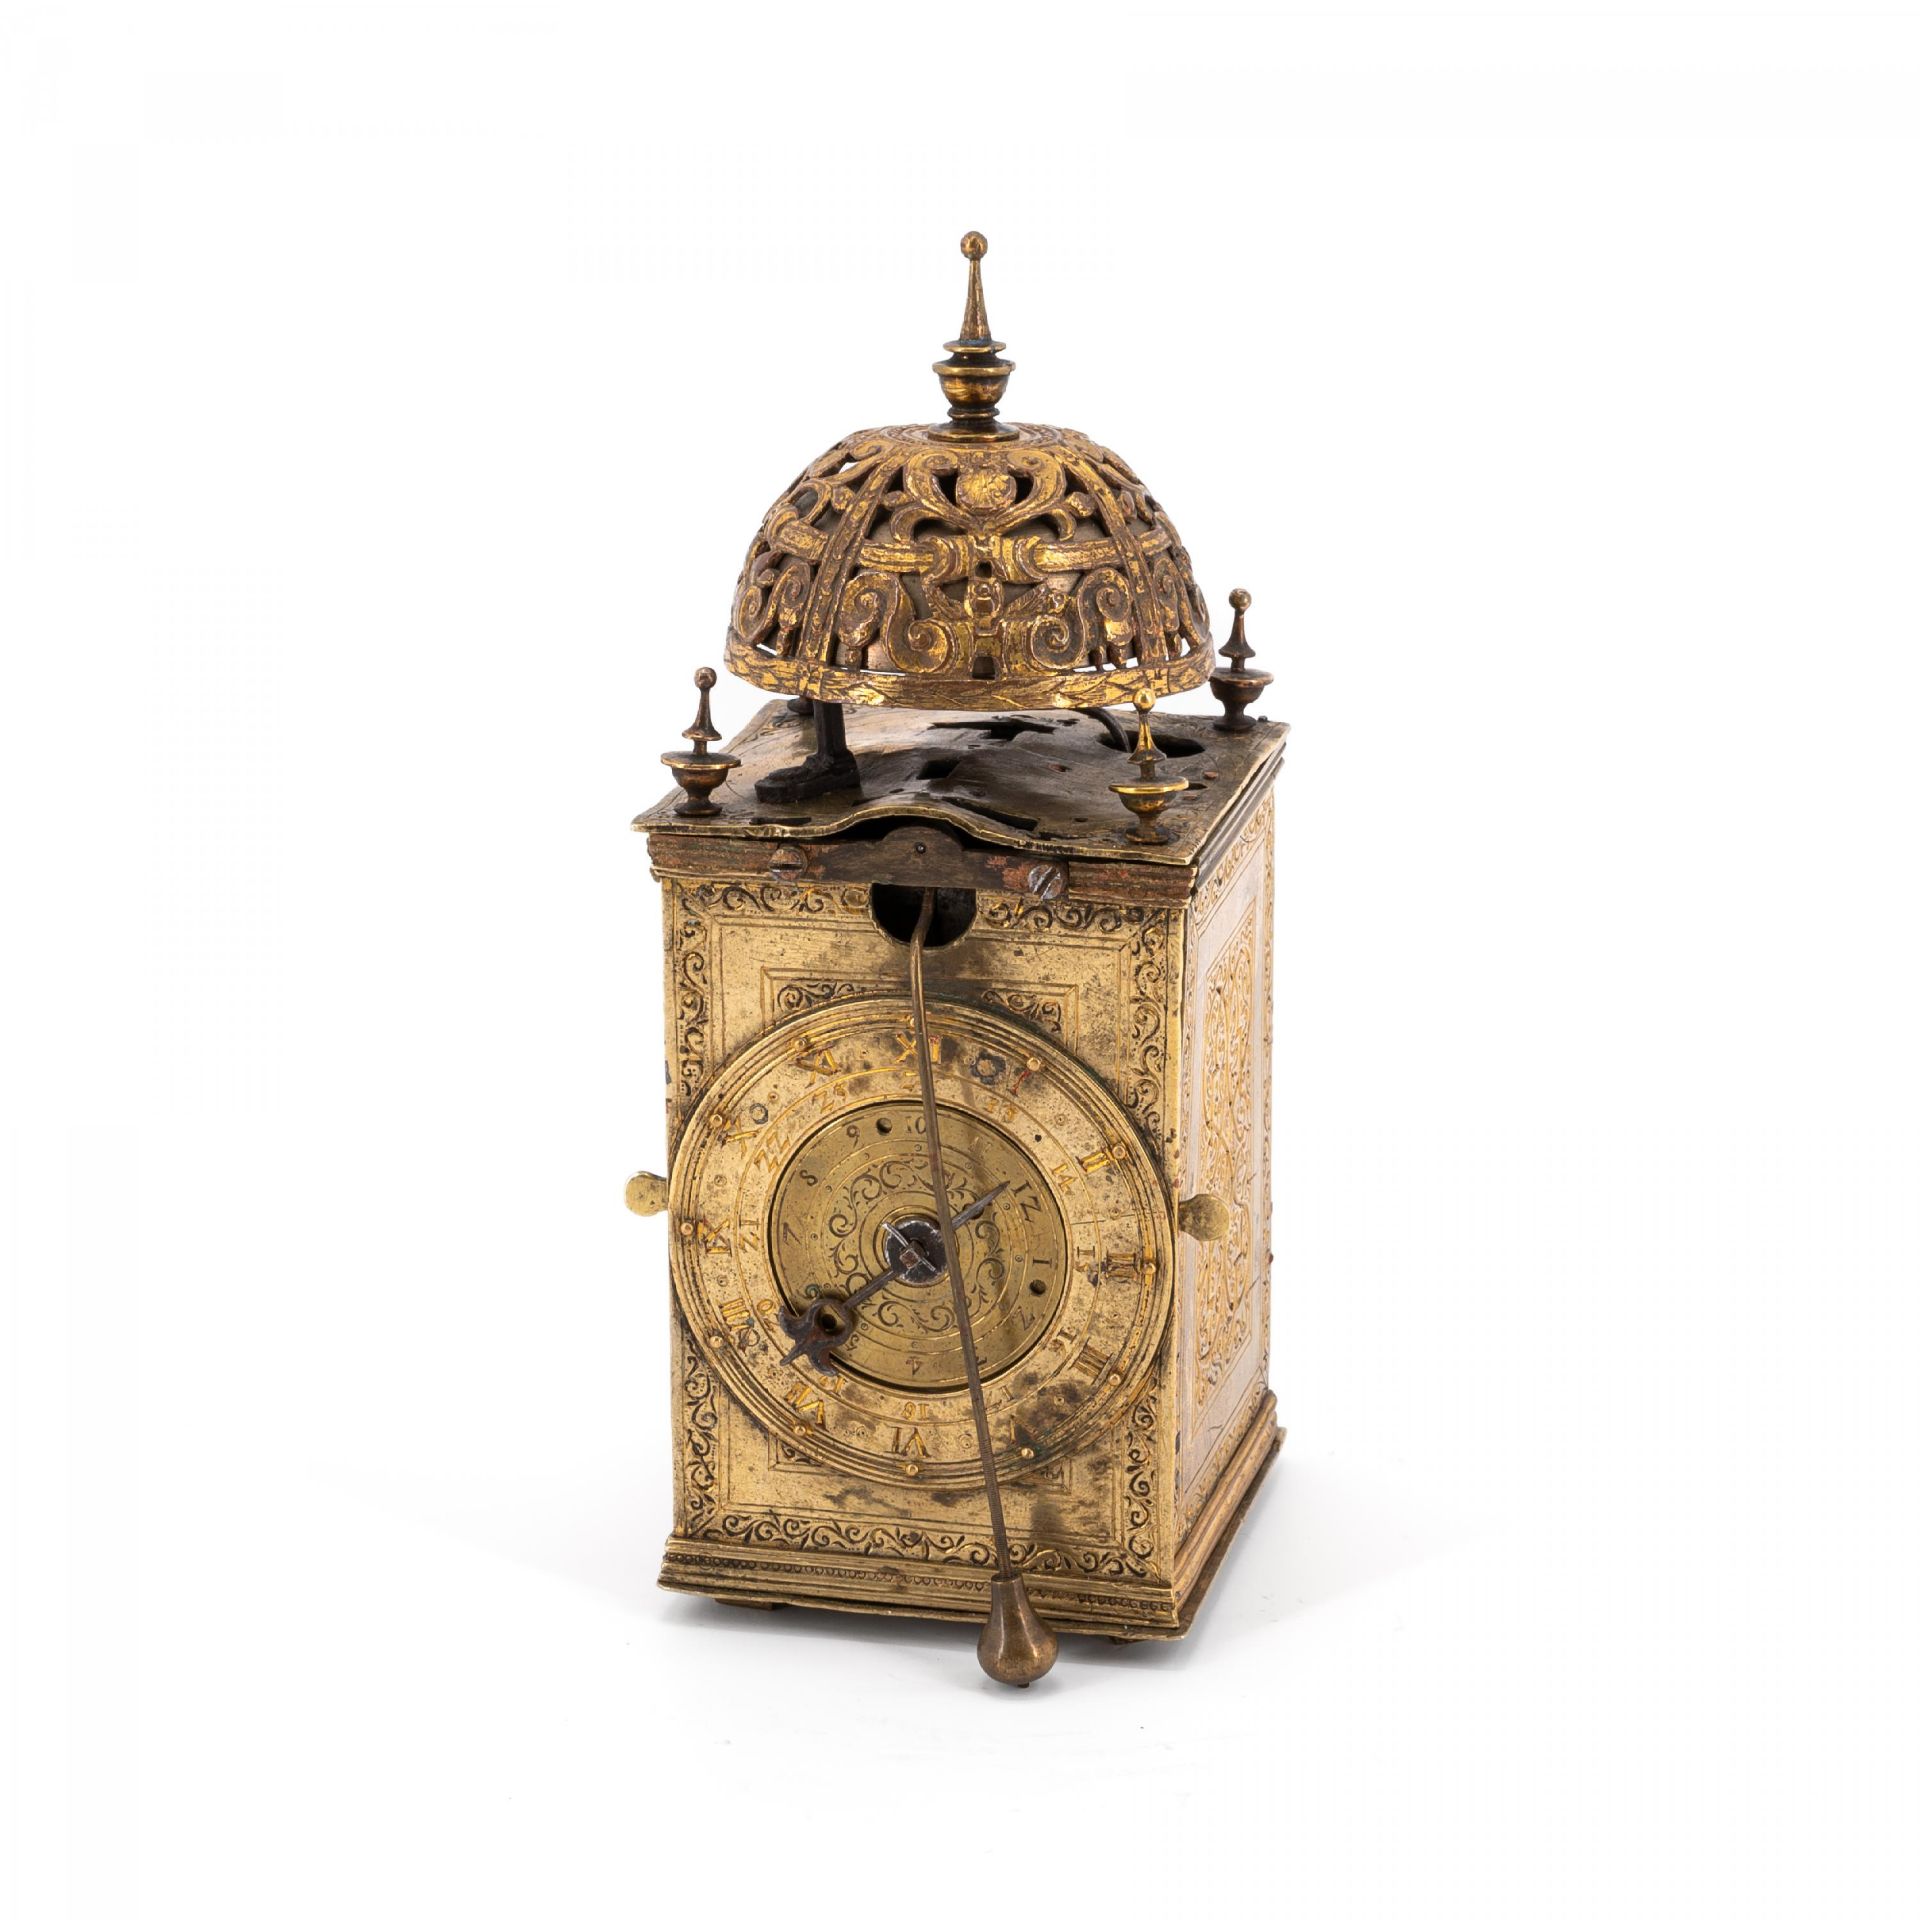 BRASS TABERNACLE CLOCK WITH FRONT ZAPPLER - Image 2 of 6